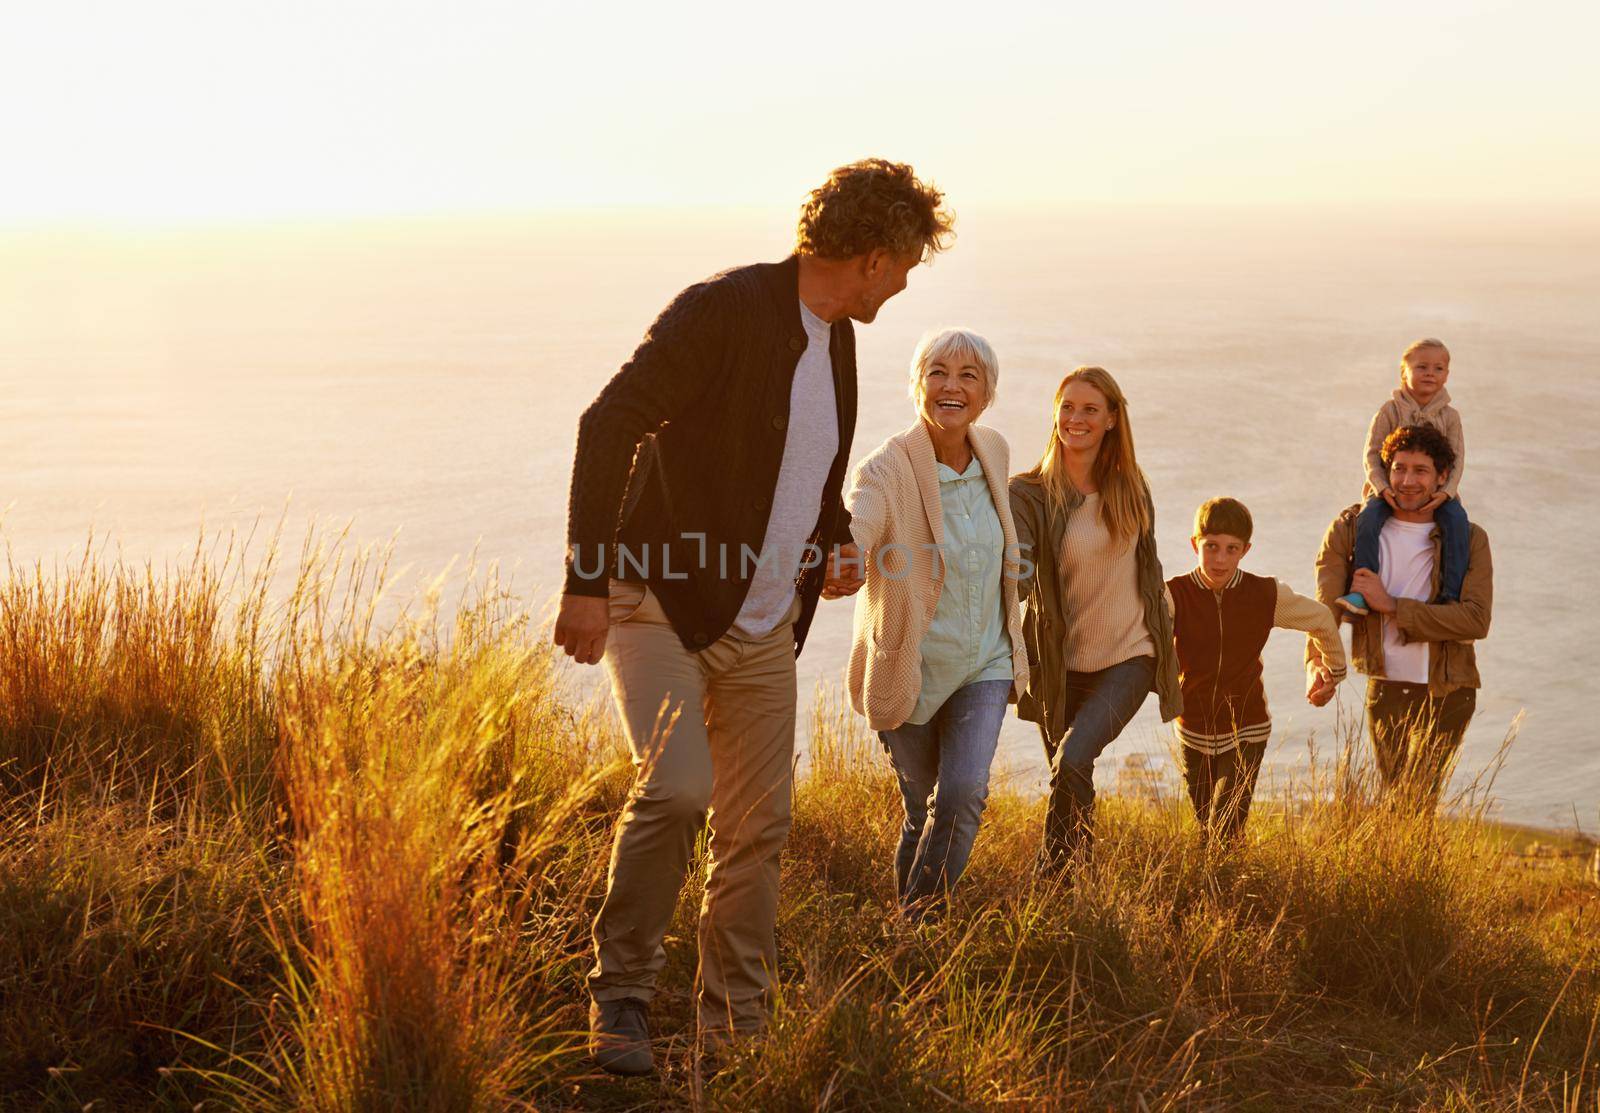 Follow the leader. A multi-generational family walking up a grassy hill together at sunset with the ocean in the background. by YuriArcurs